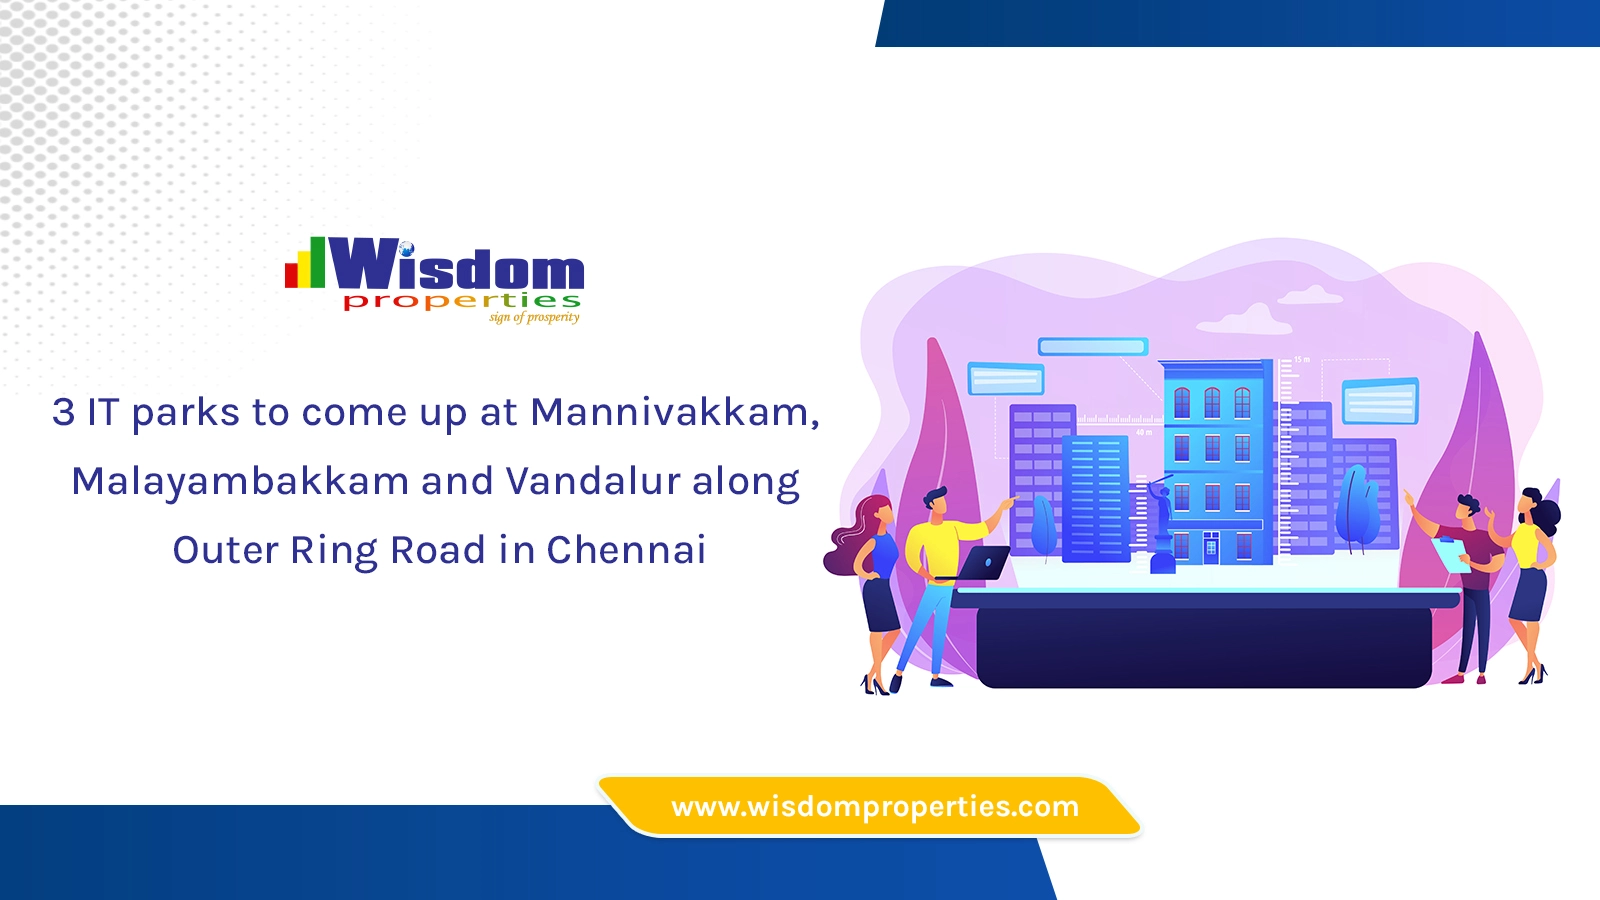 New IT Parks Planned at Chennai's Outer Ring Road: Mannivakkam, Malayambakkam, and Vandalur in Tamil Nadu